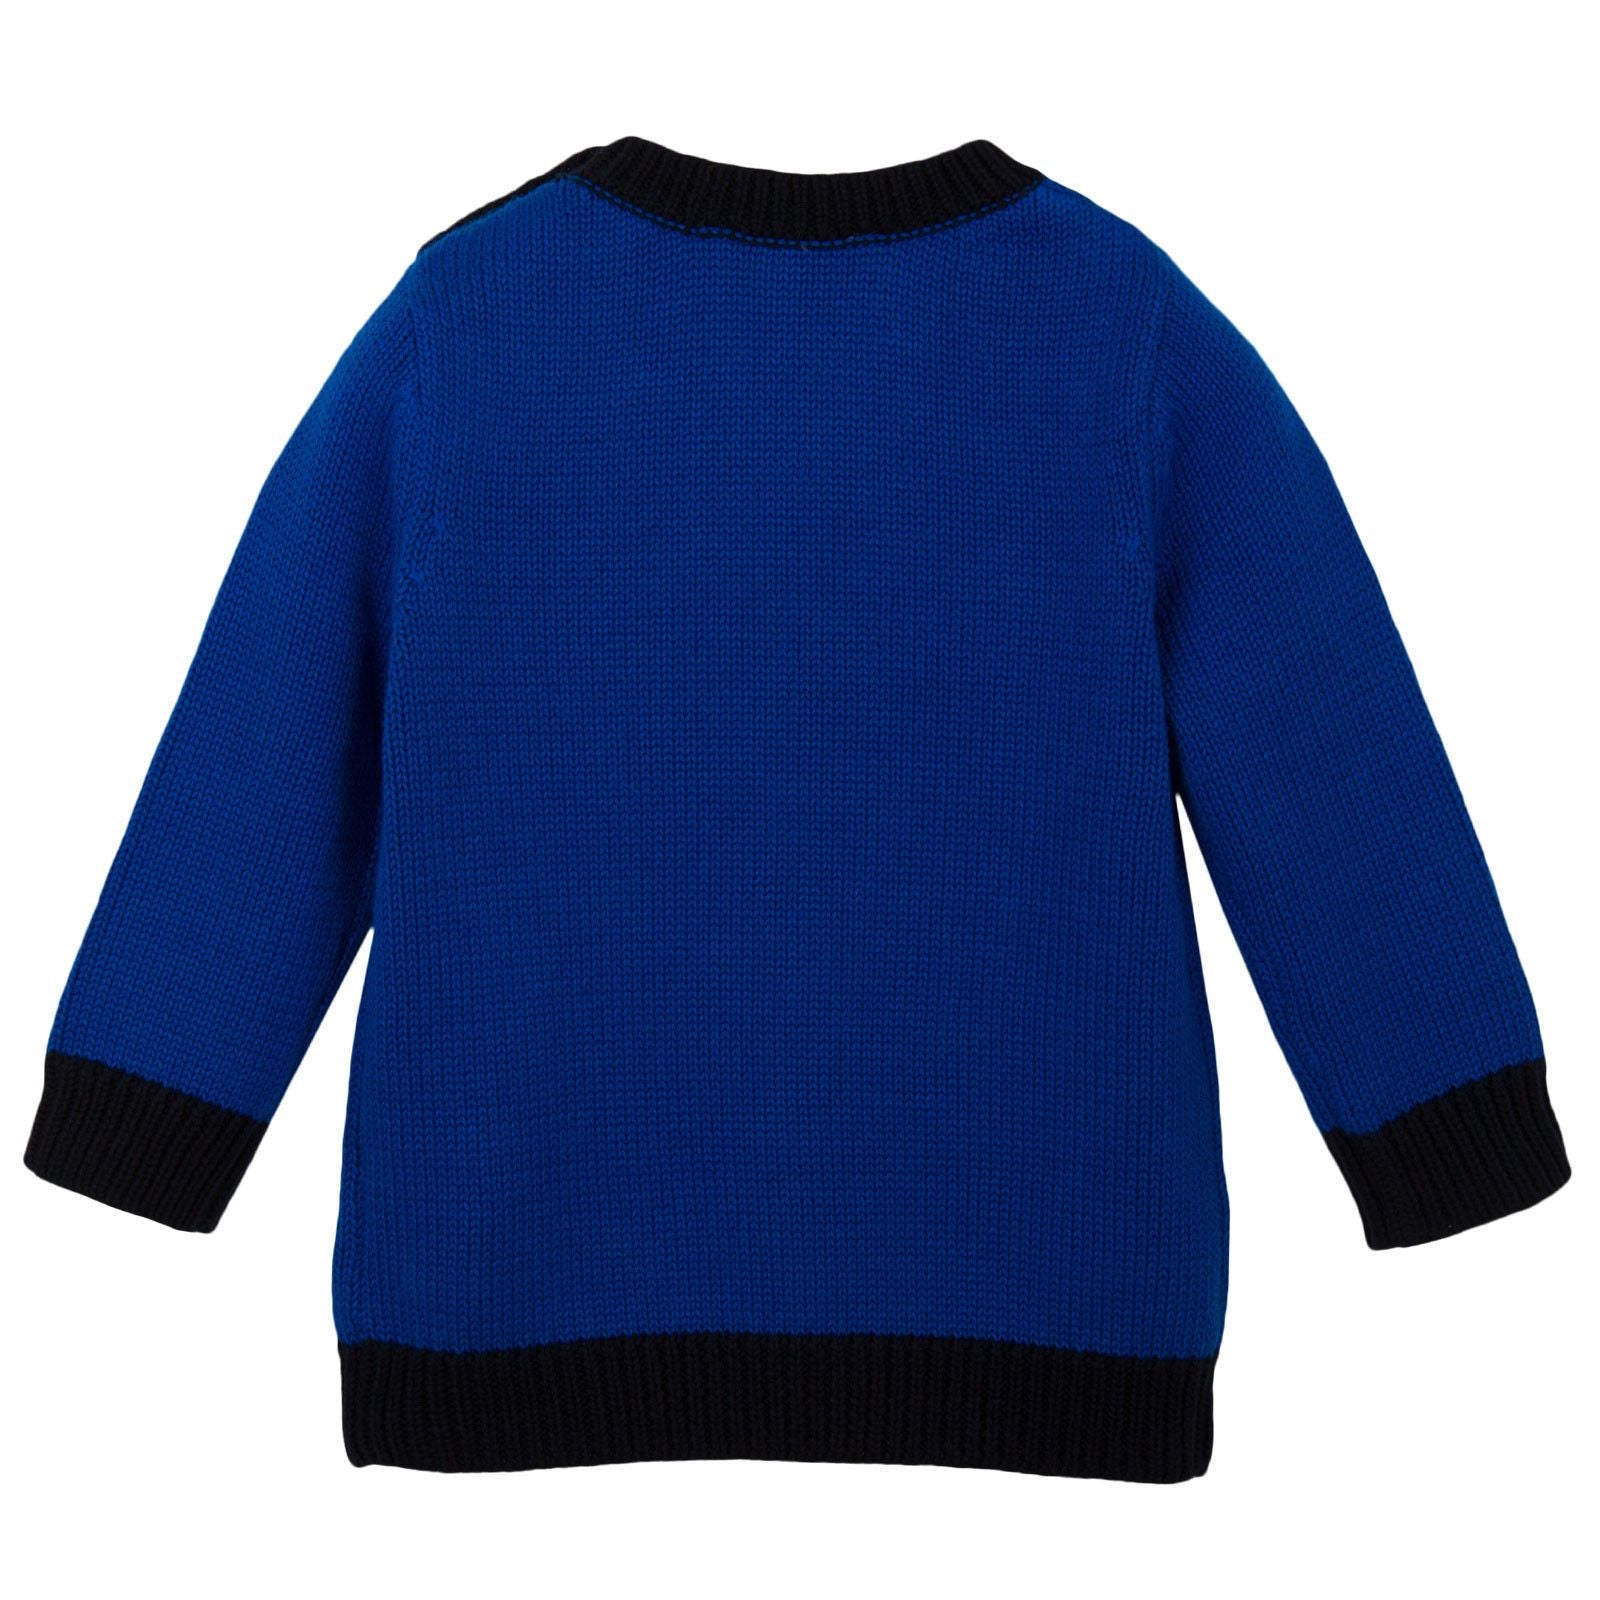 Baby Boys Blue 'Mr Marc' Knitted Sweater - CÉMAROSE | Children's Fashion Store - 2